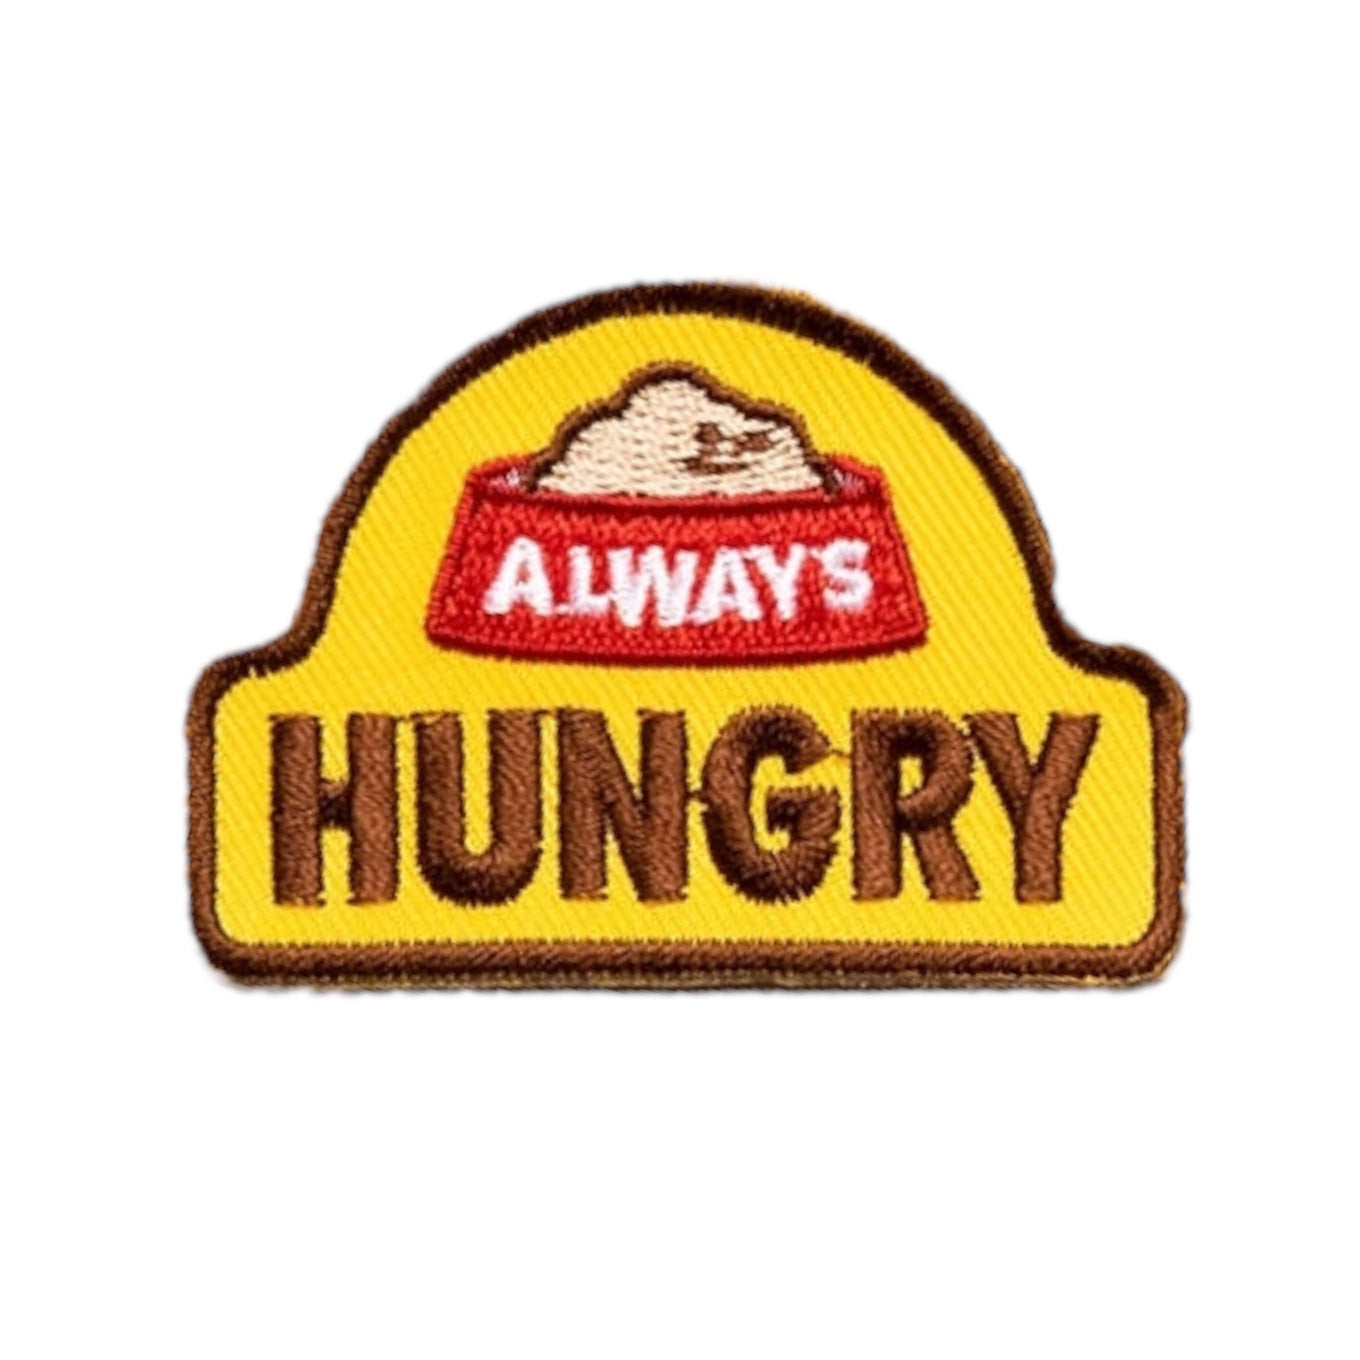 Always Hungry Badge